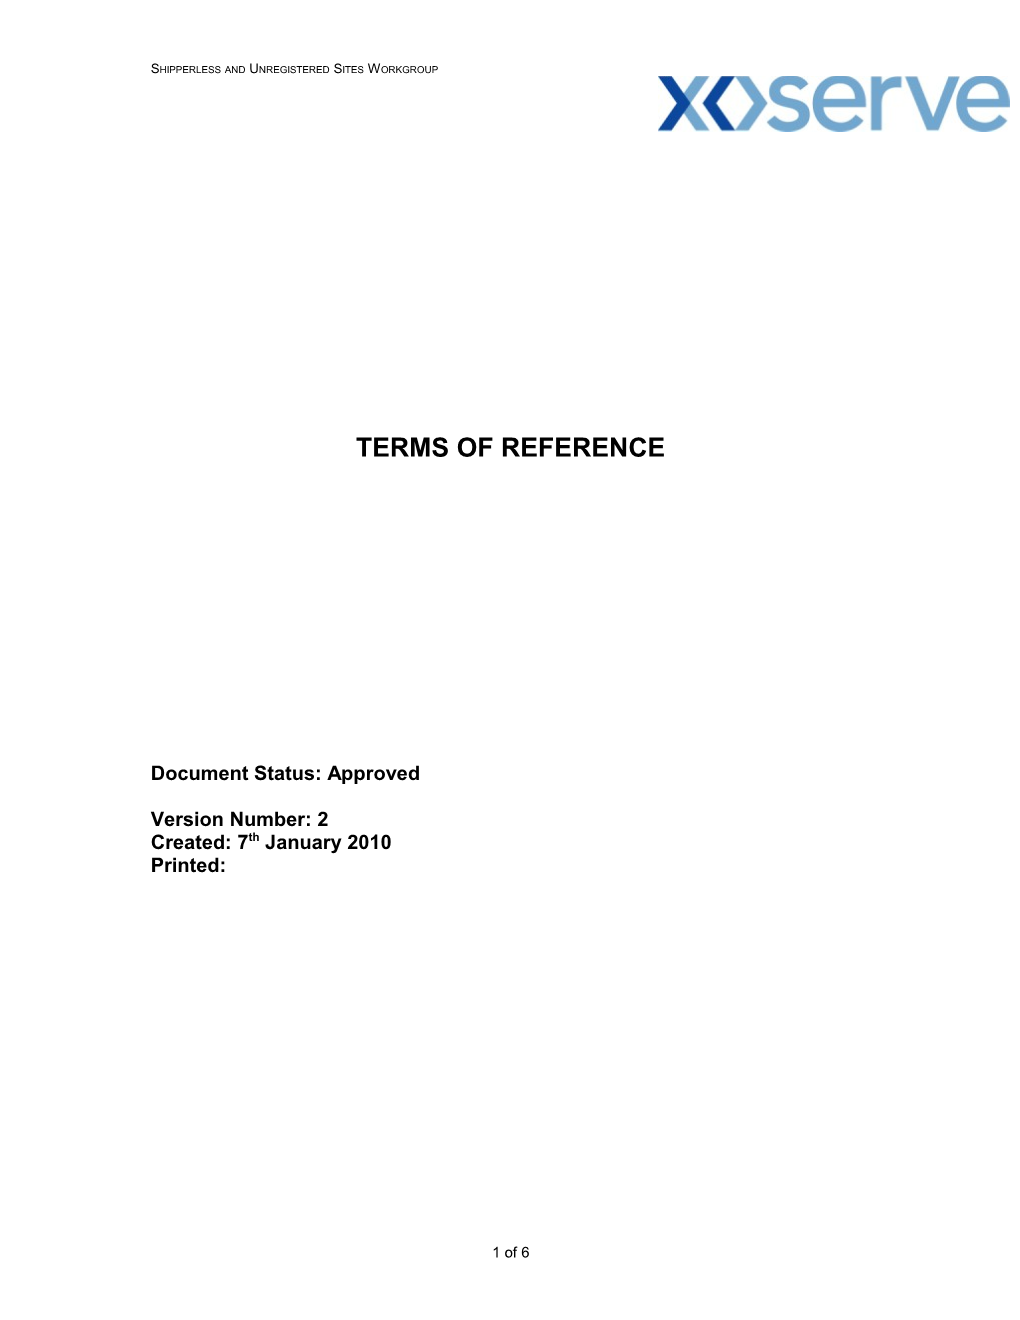 Project Terms of Reference